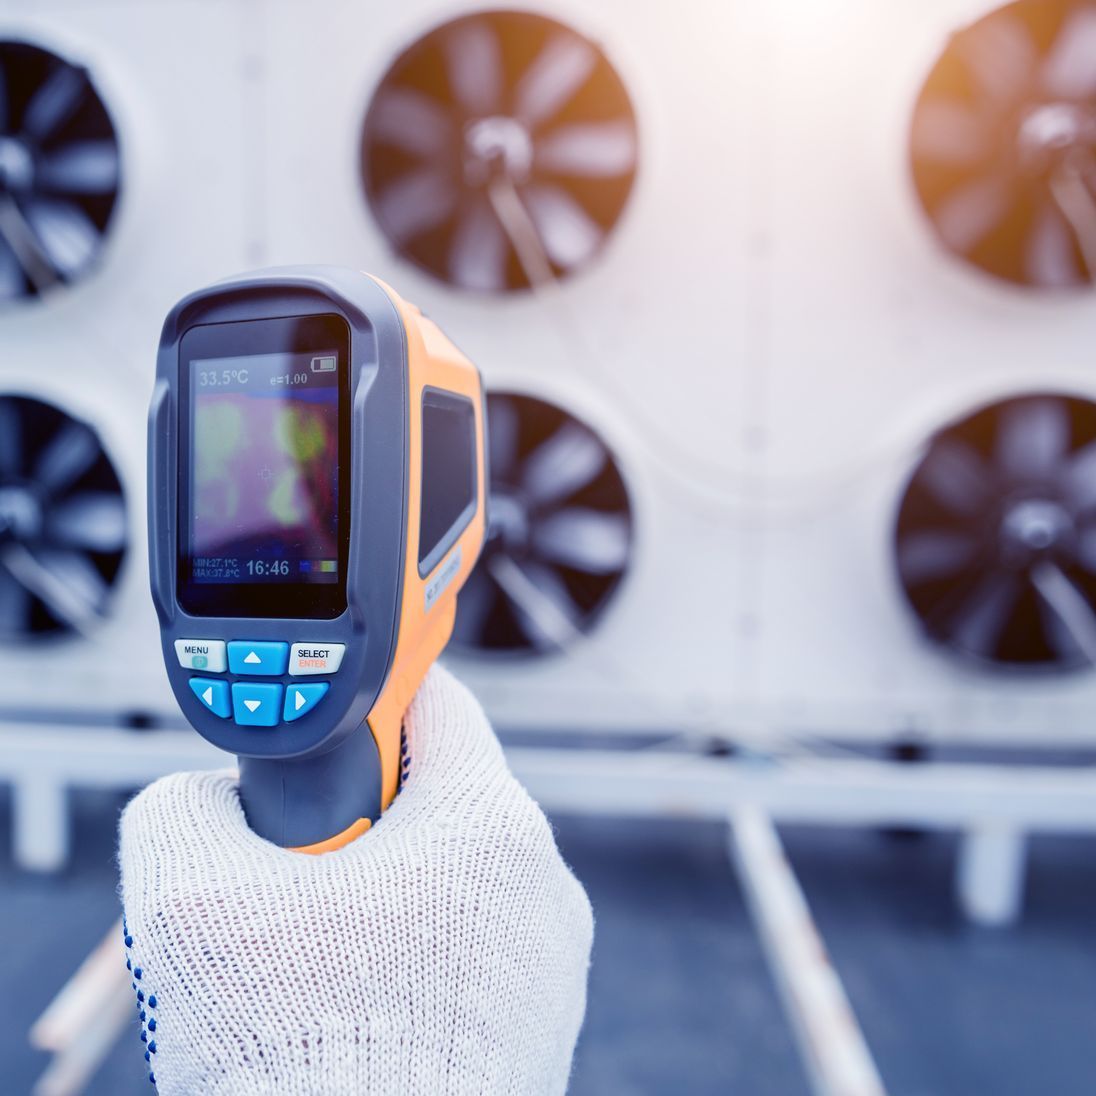 A person is holding a thermometer in front of a bunch of fans.